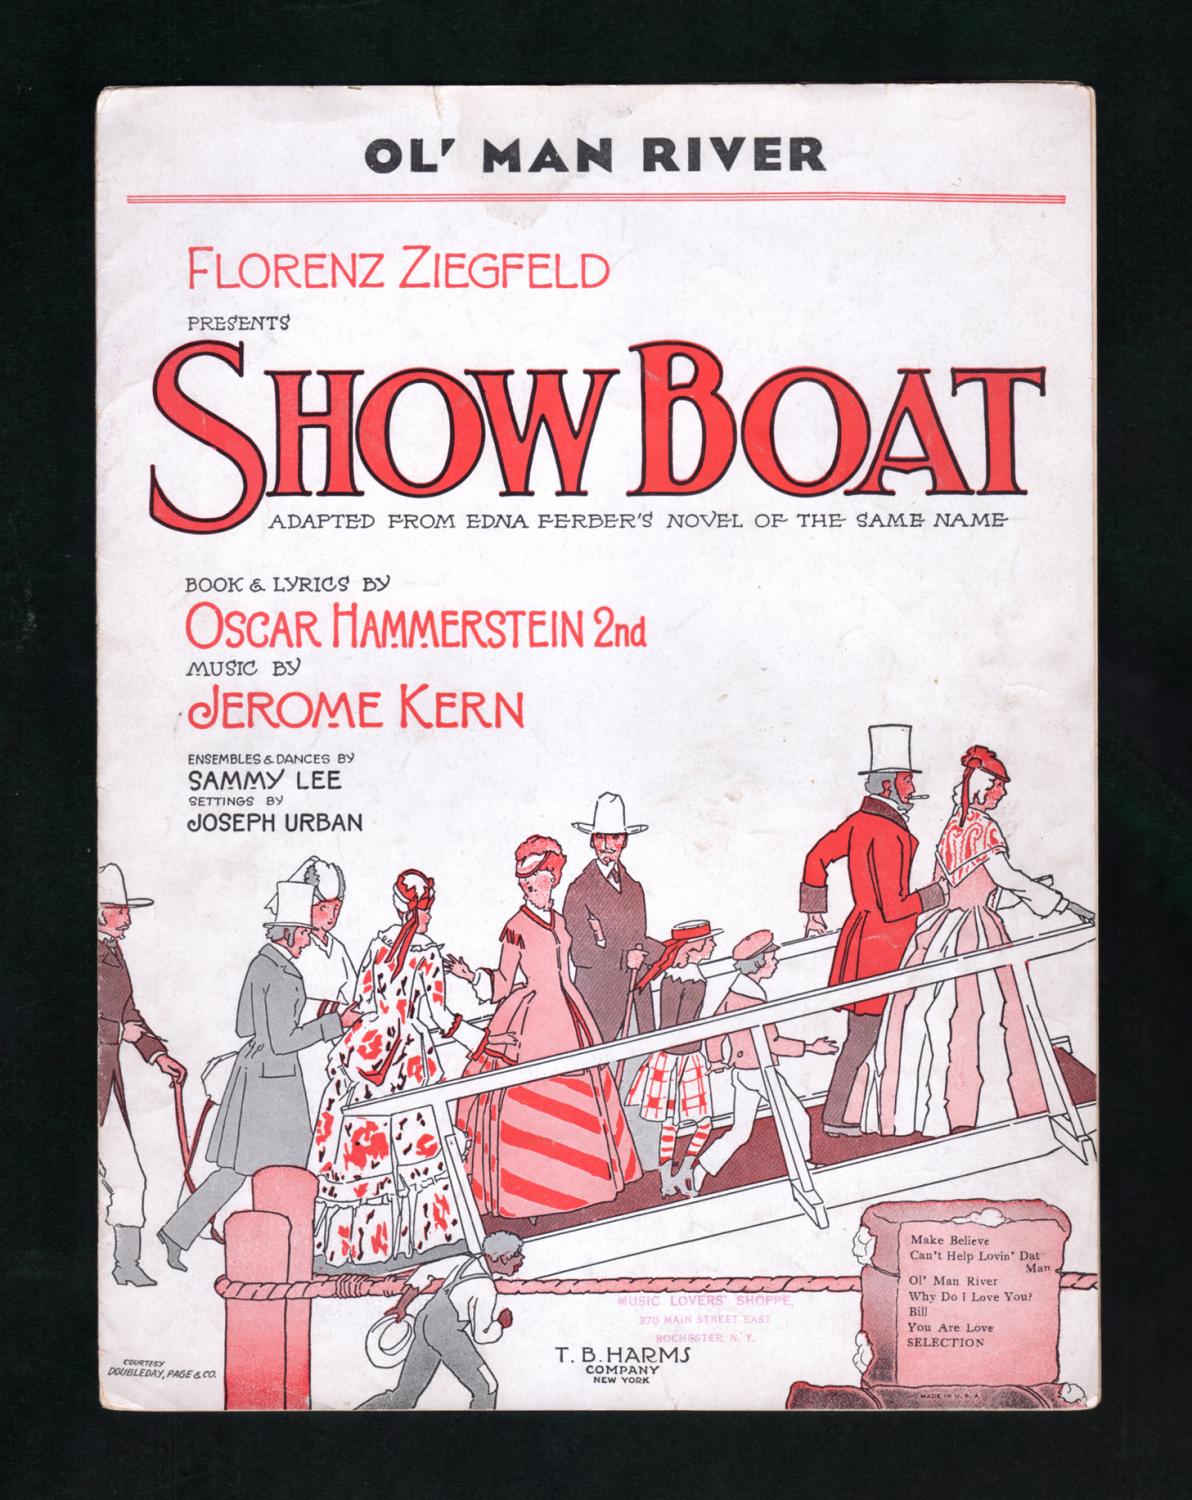 Ol Man River Vintage 1927 Sheet Music From Florenz Ziegfeld S Show Boat Oscar Hammerstein 2nd And Jerome Kern Includes Roberta Why Do I Love You T B Harms Company By Oscar